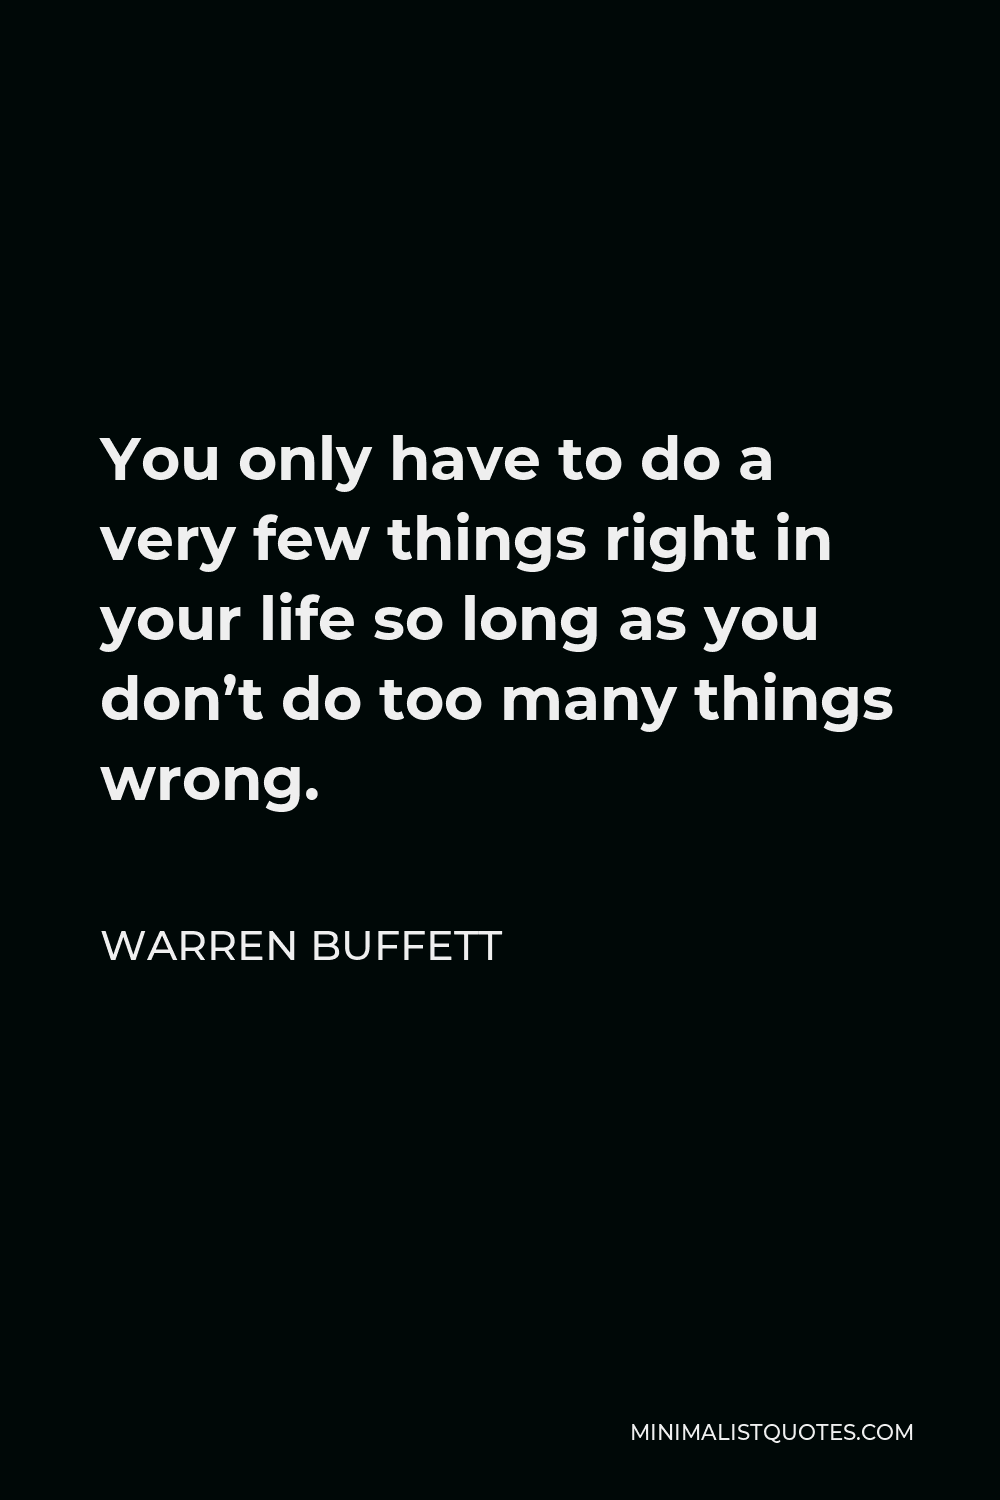 Warren Buffett Quote - You only have to do a very few things right in your life so long as you don’t do too many things wrong.